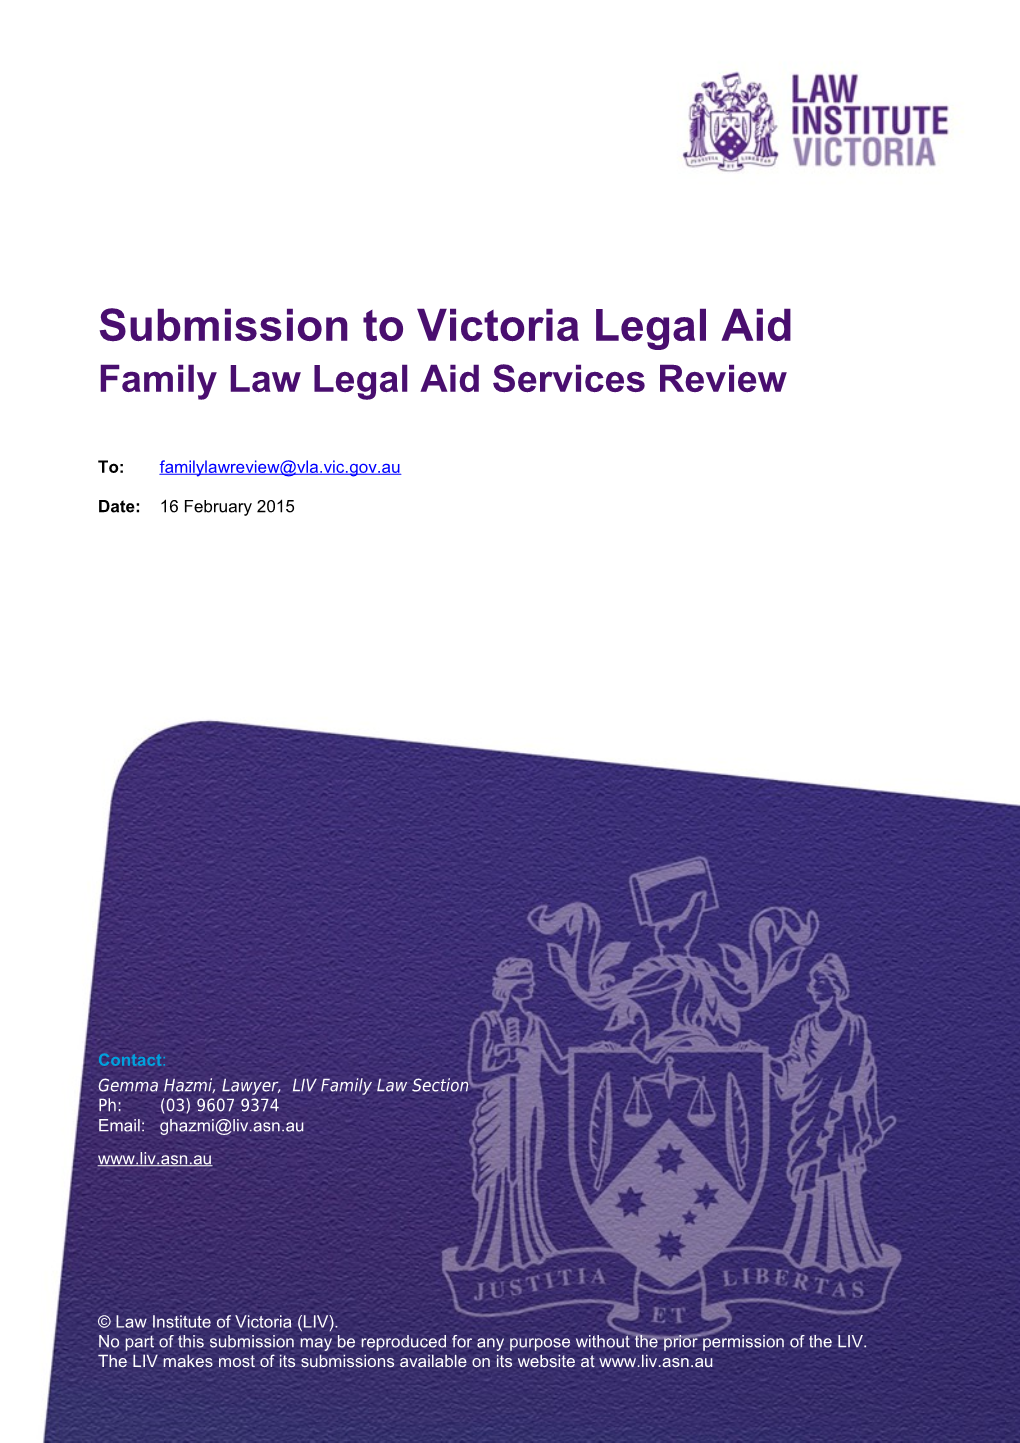 Submission to Victoria Legal Aid Family Law Legal Aid Services Review